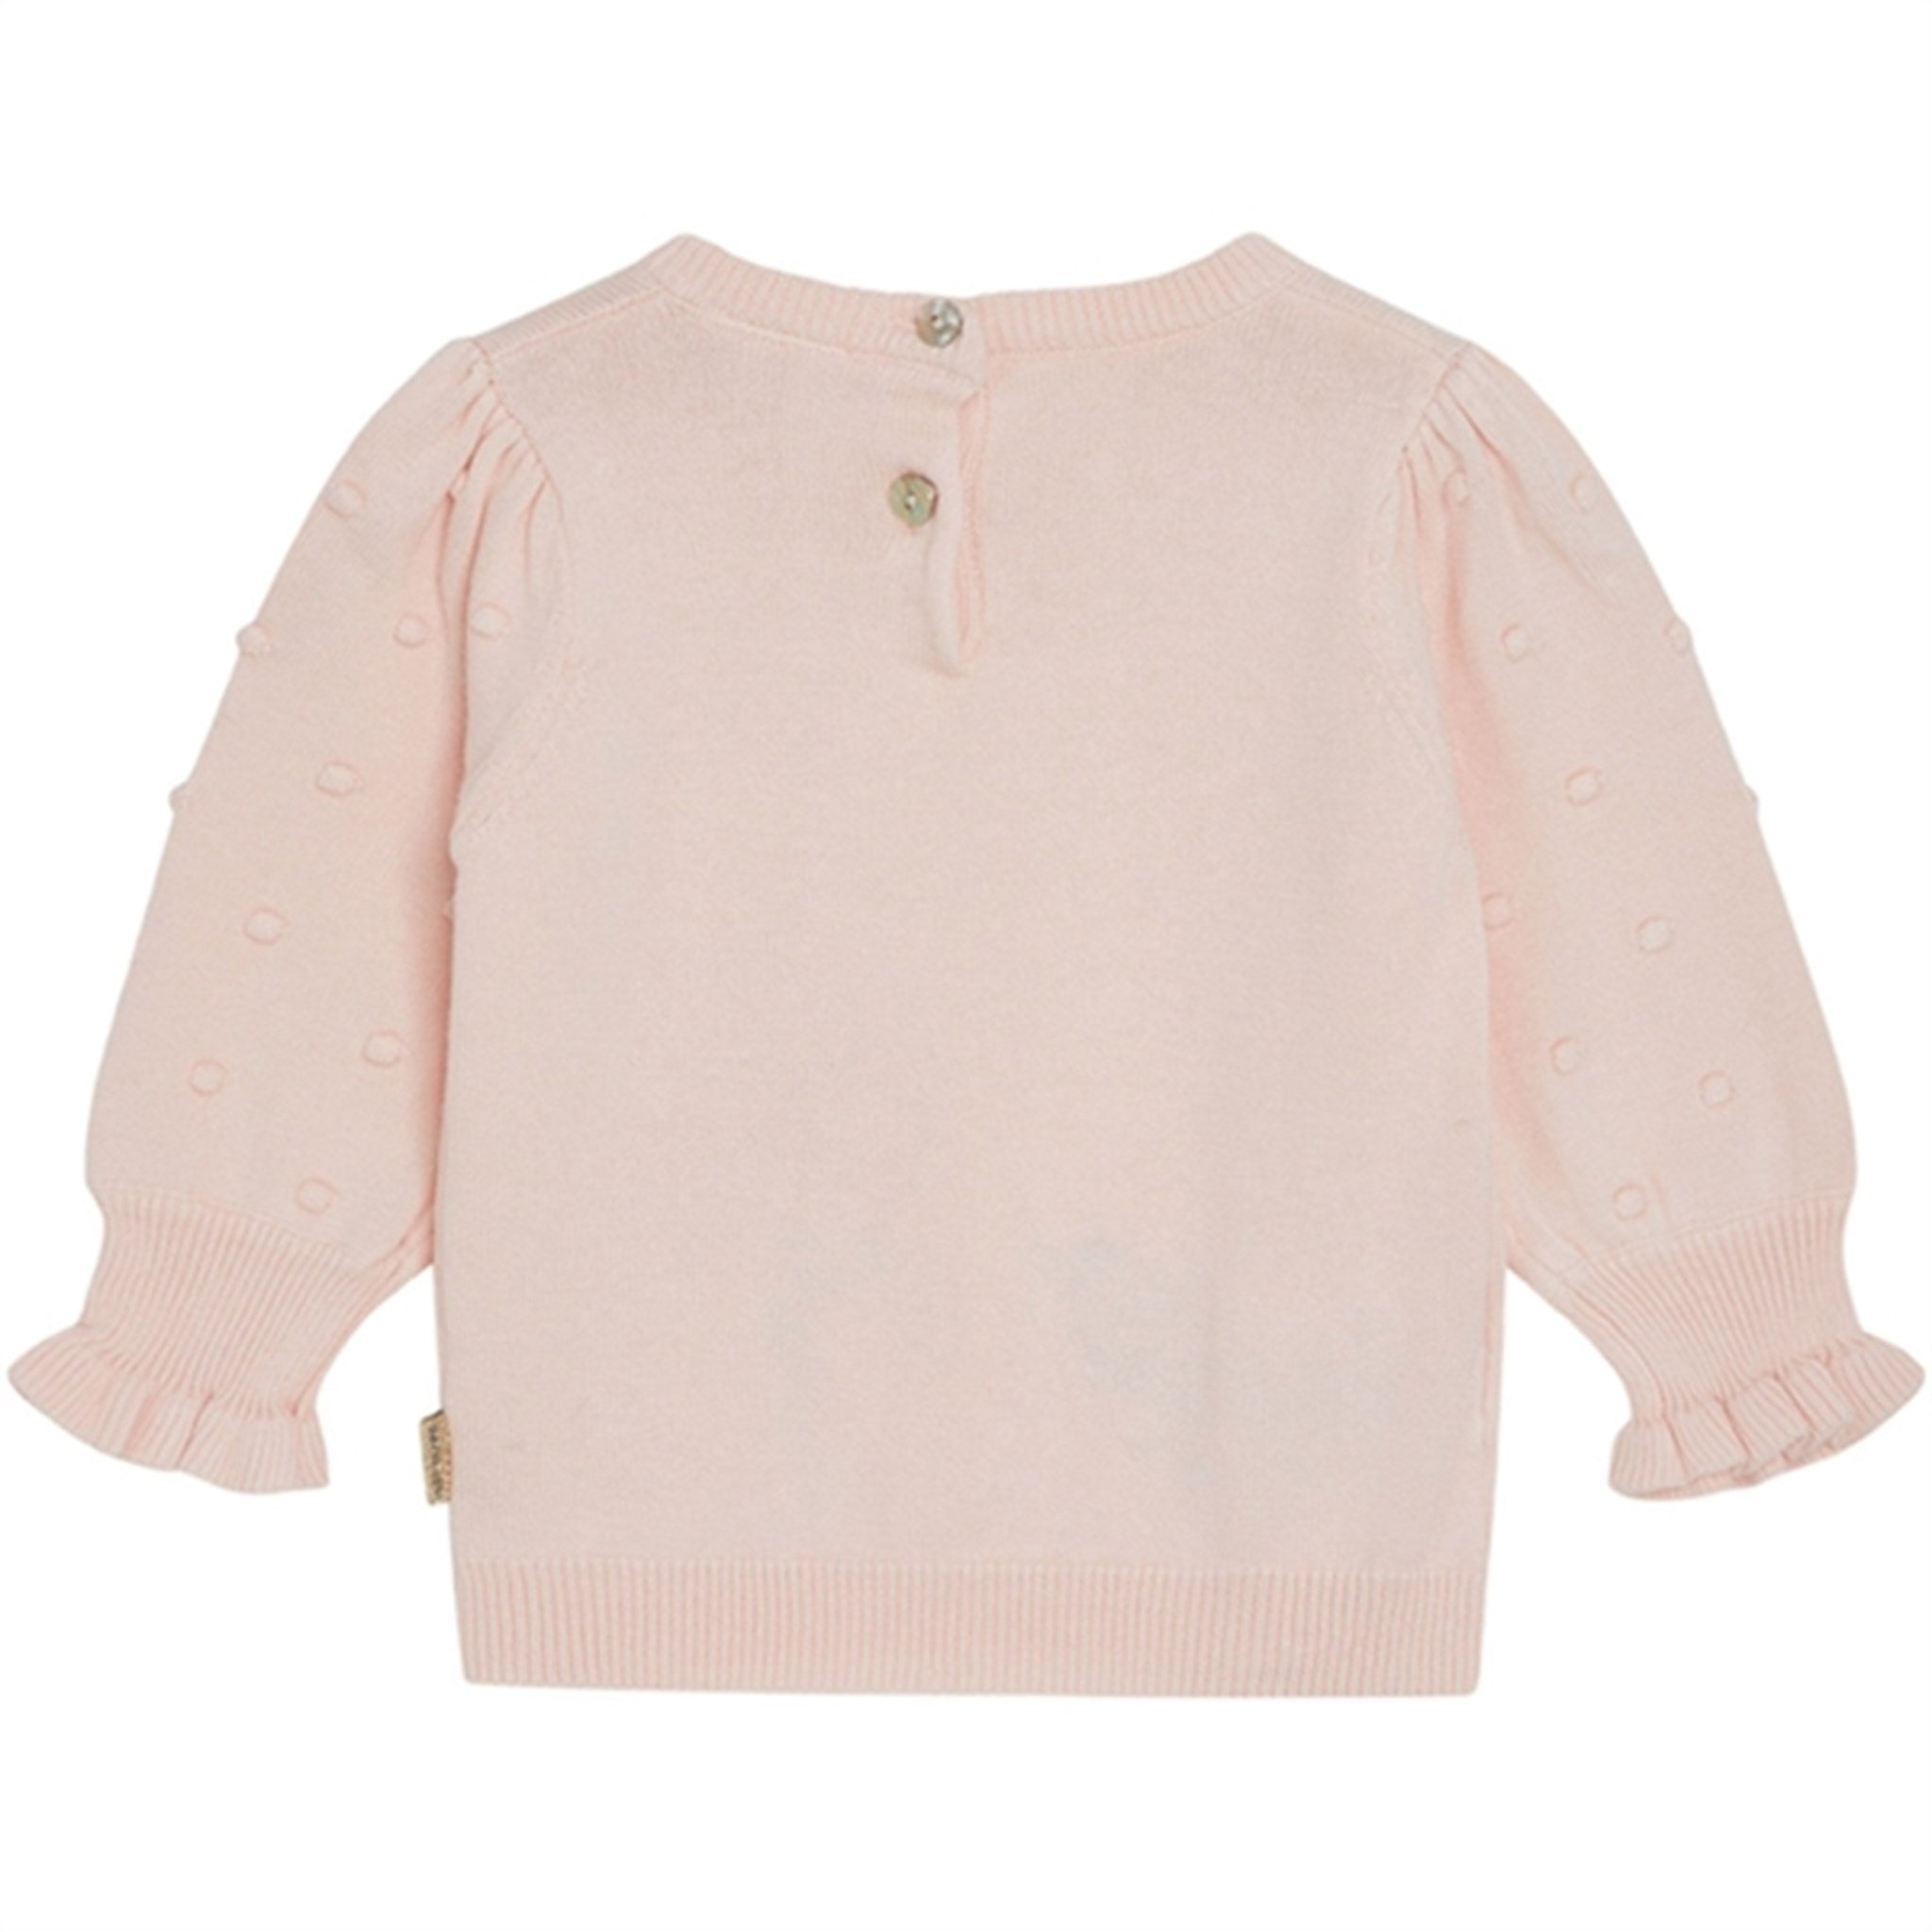 Hust & Claire Baby Icy Pink Paola Bluse 3